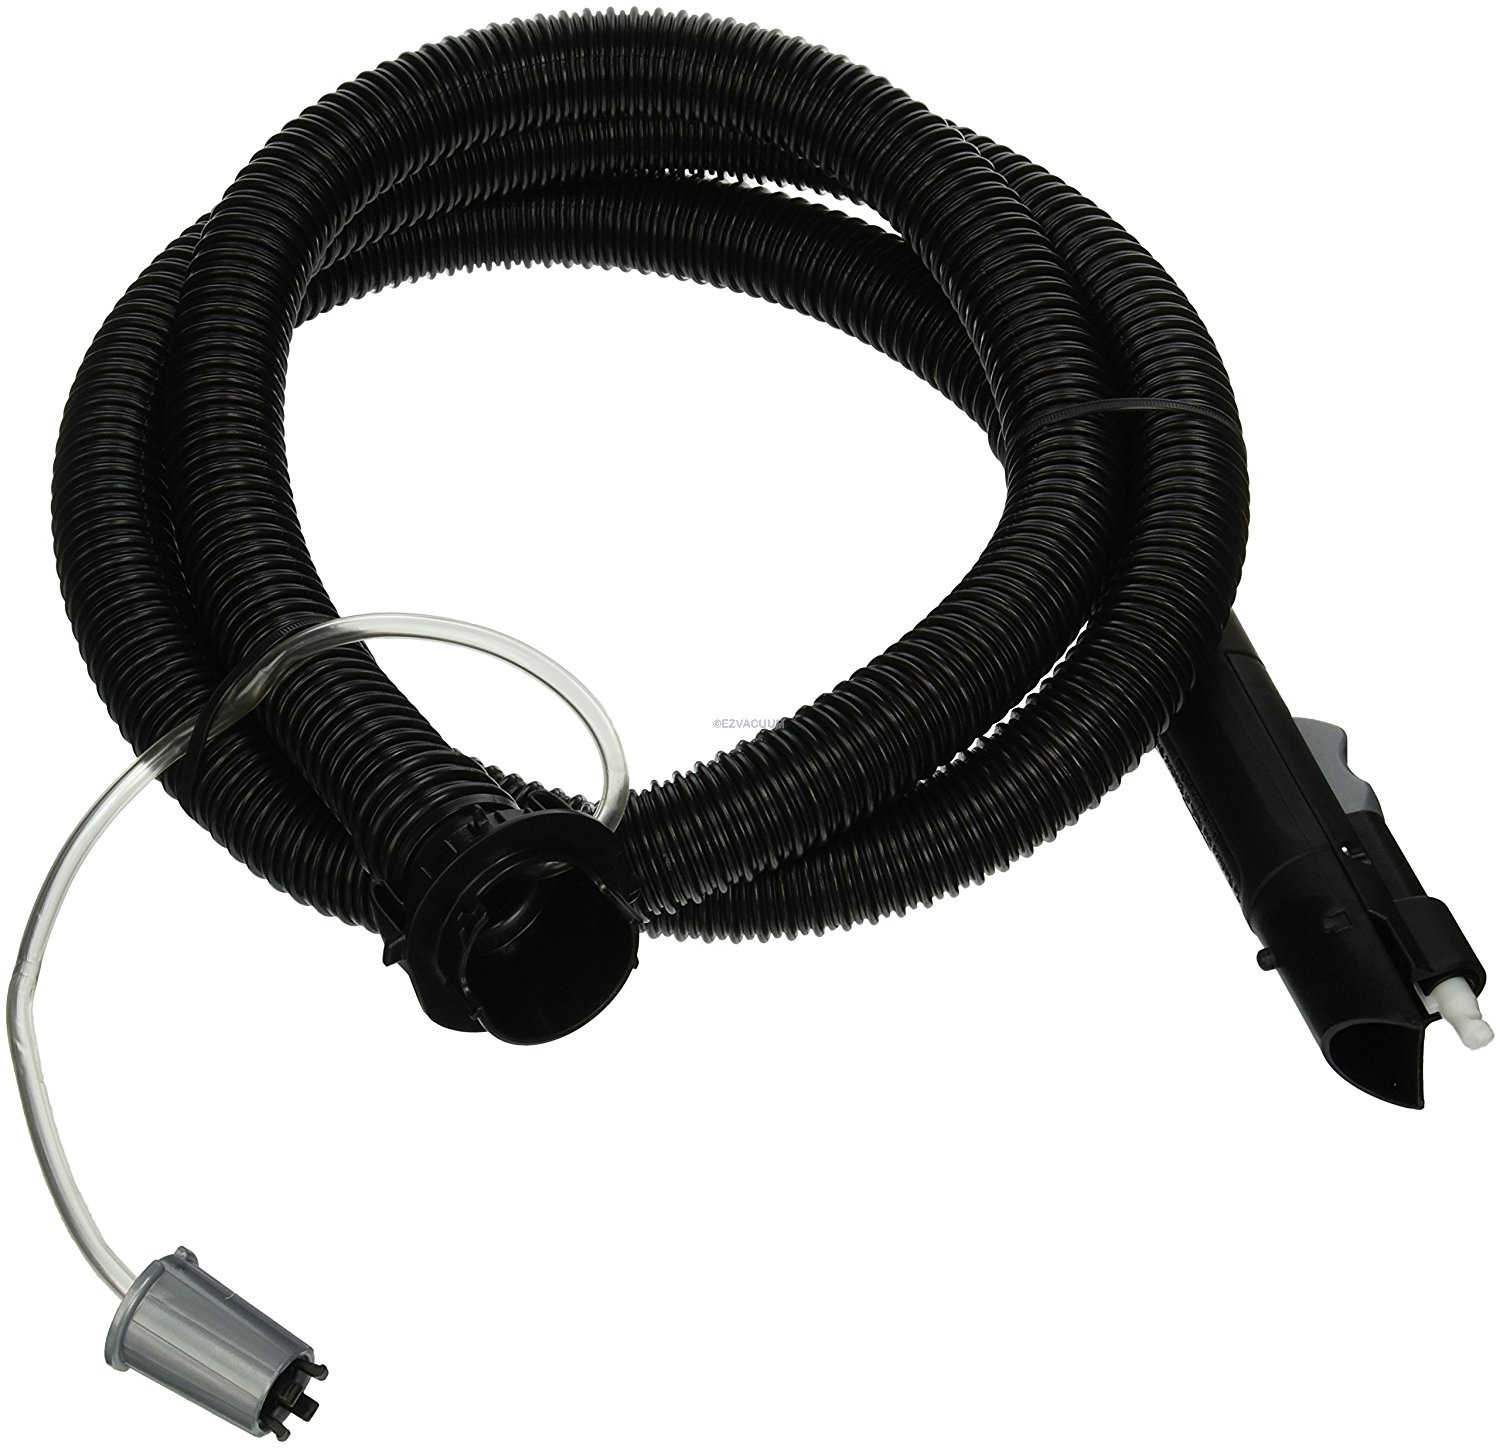 Hoover Hose fits models FH50140 FH50151 FH50152 and FH50153 FH50130 FH50150 